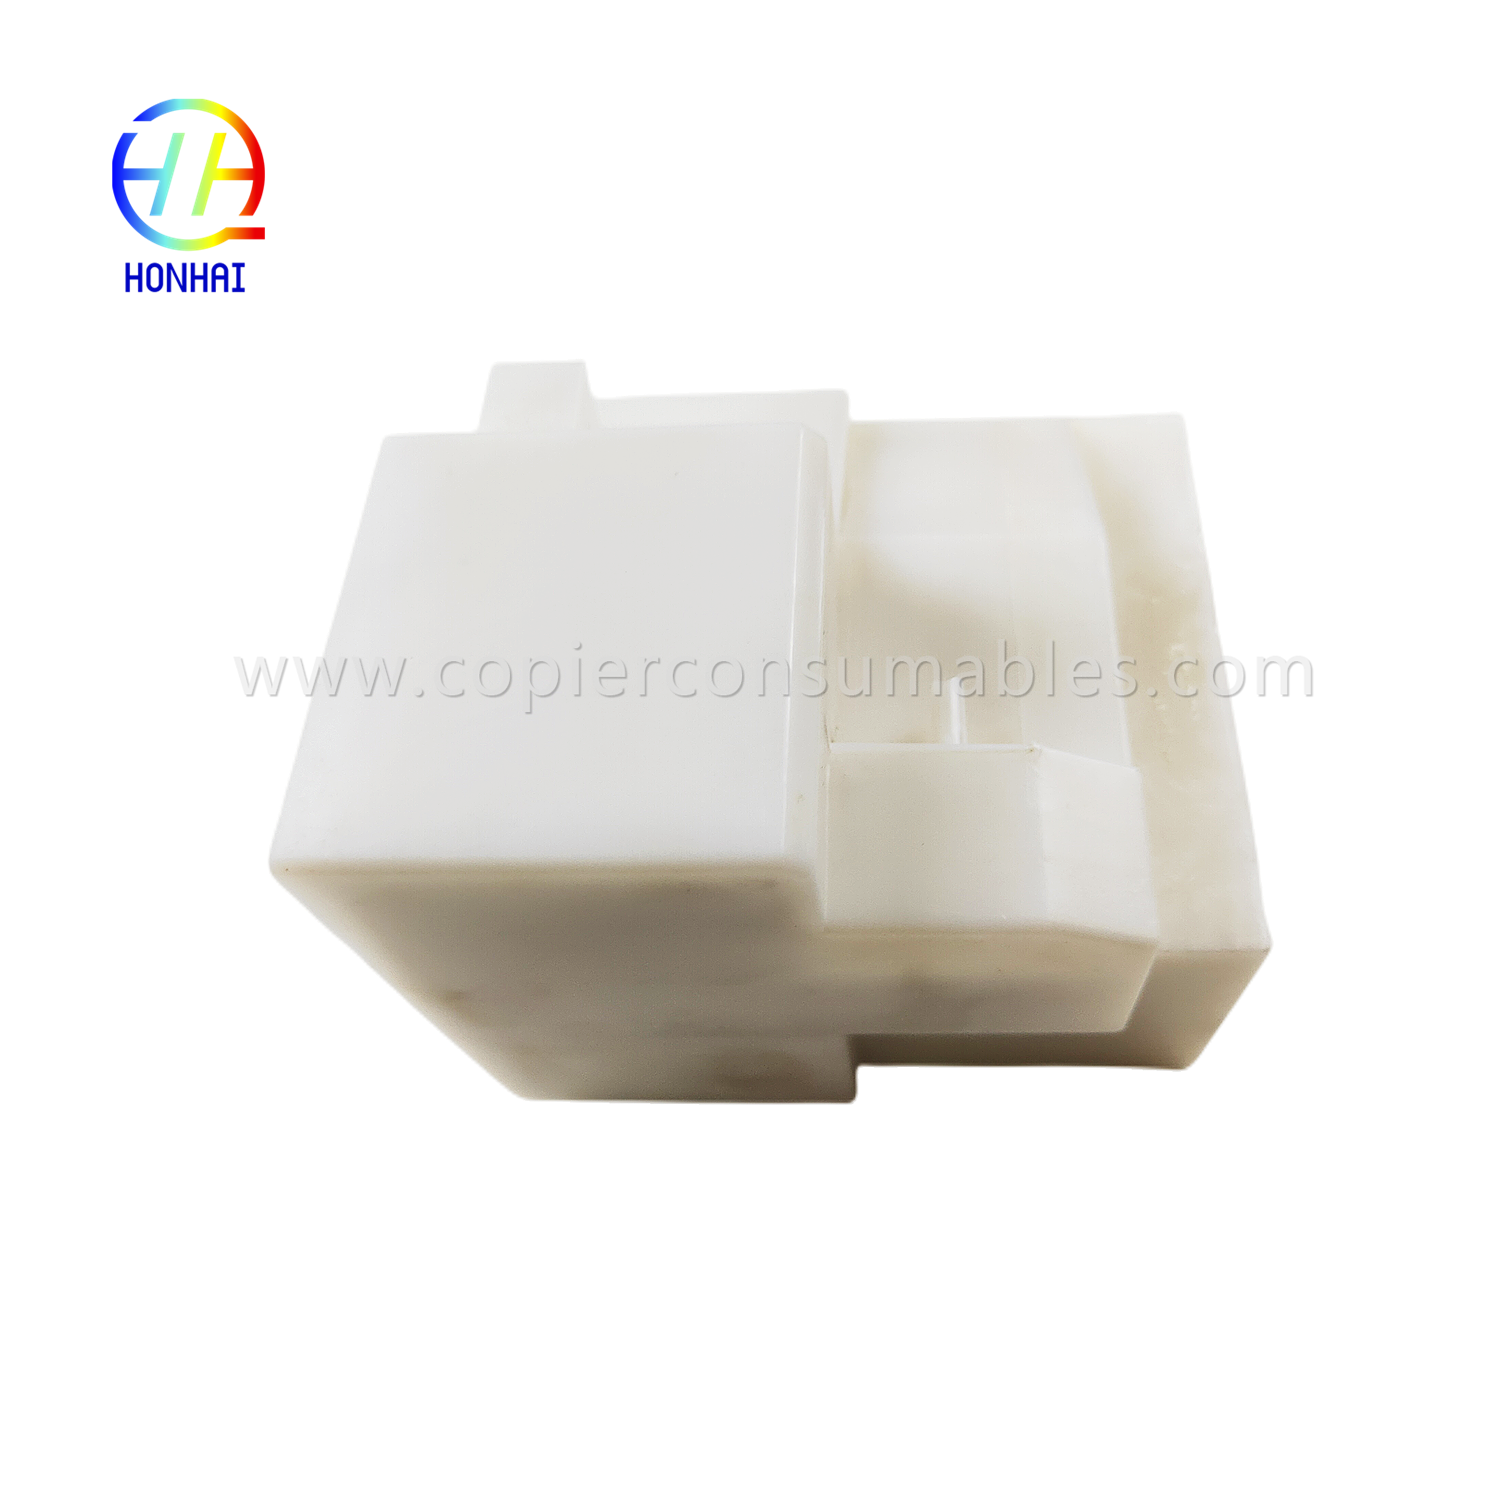 https://c585.goodao.net/waste-ink-pad-for-epson-l800-l805-l810-l850-r280-r290-product/